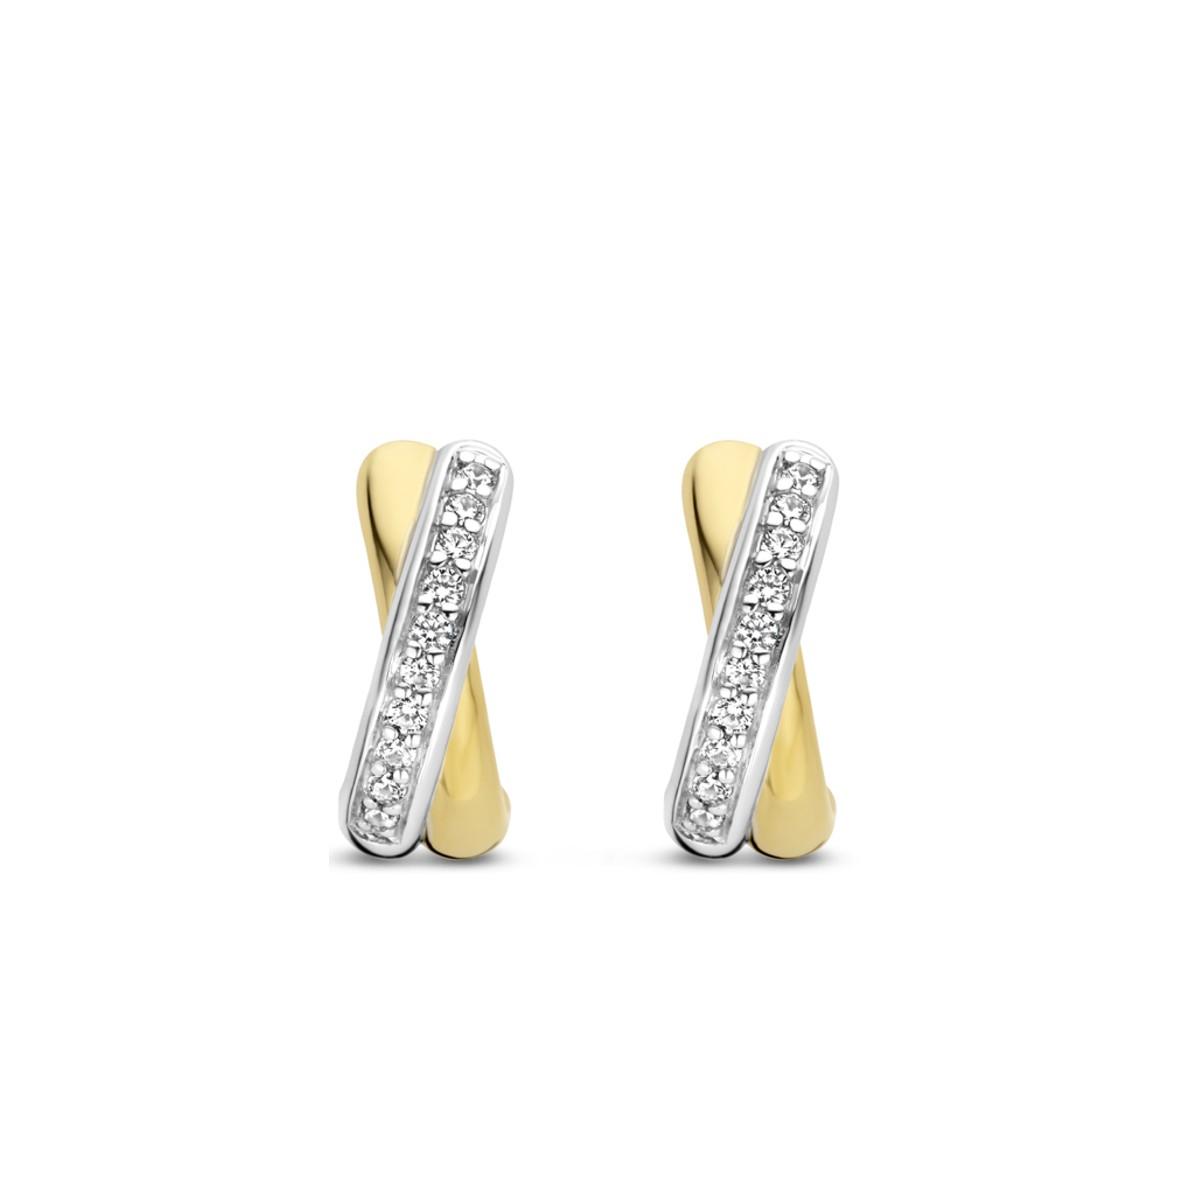 TI SENTO GOLD-PLATED SILVER EARRINGS 7667ZY